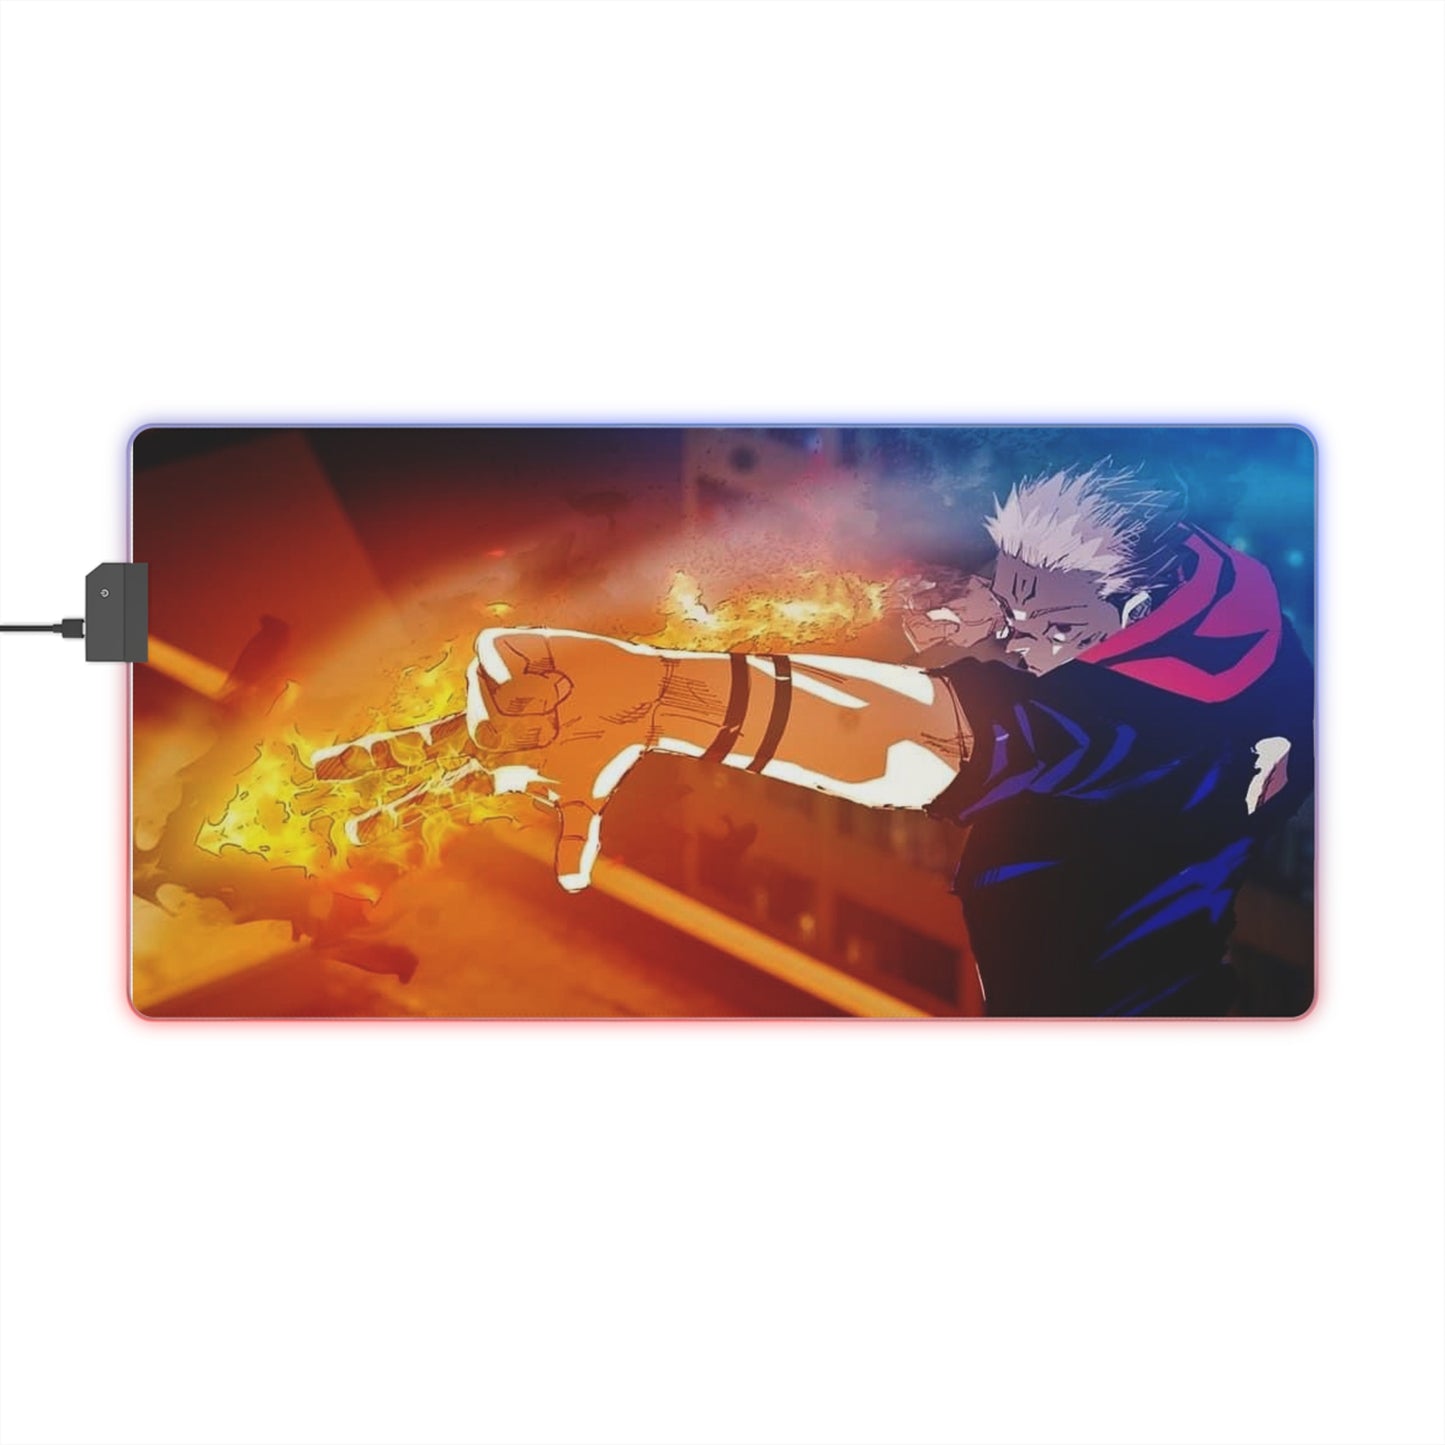 King of Curses LED Gaming Mouse Pad